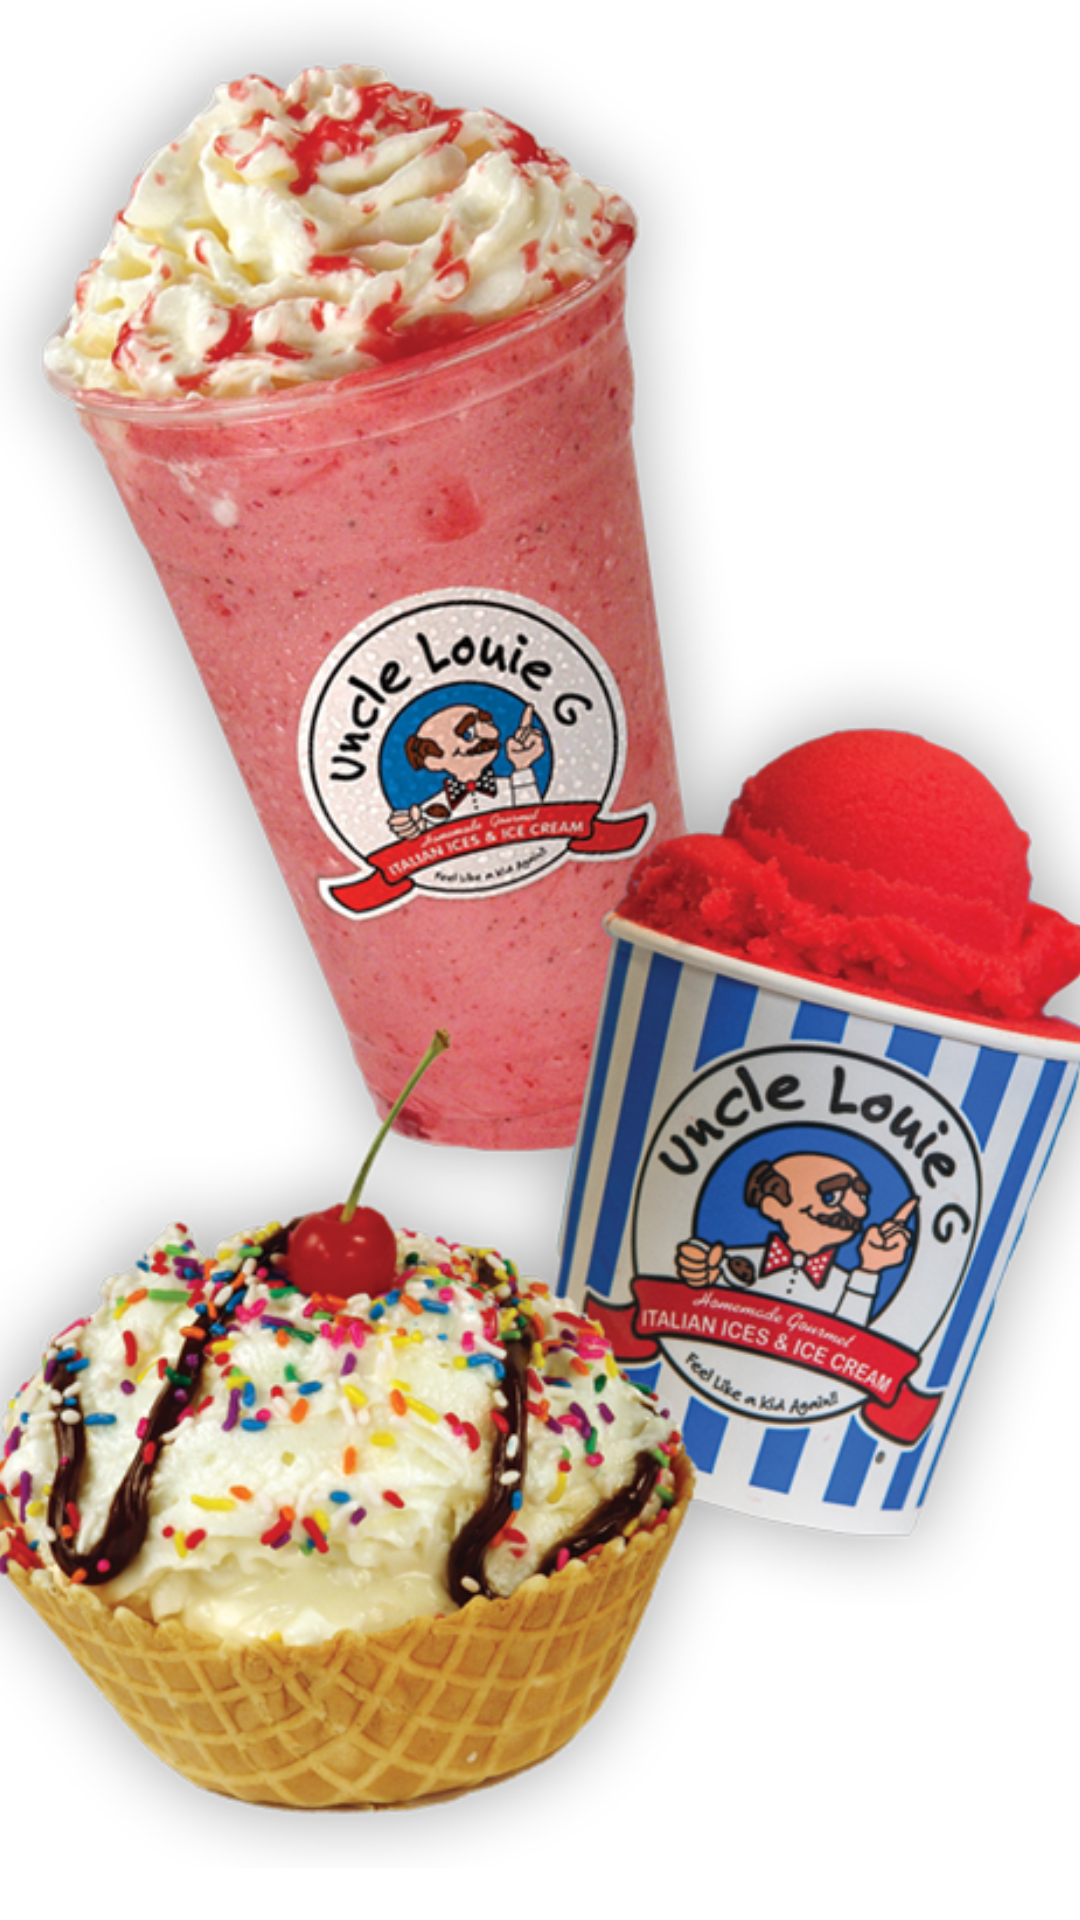 Uncle Louie G Italian Ices & Ice Cream Opens in Coral Springs